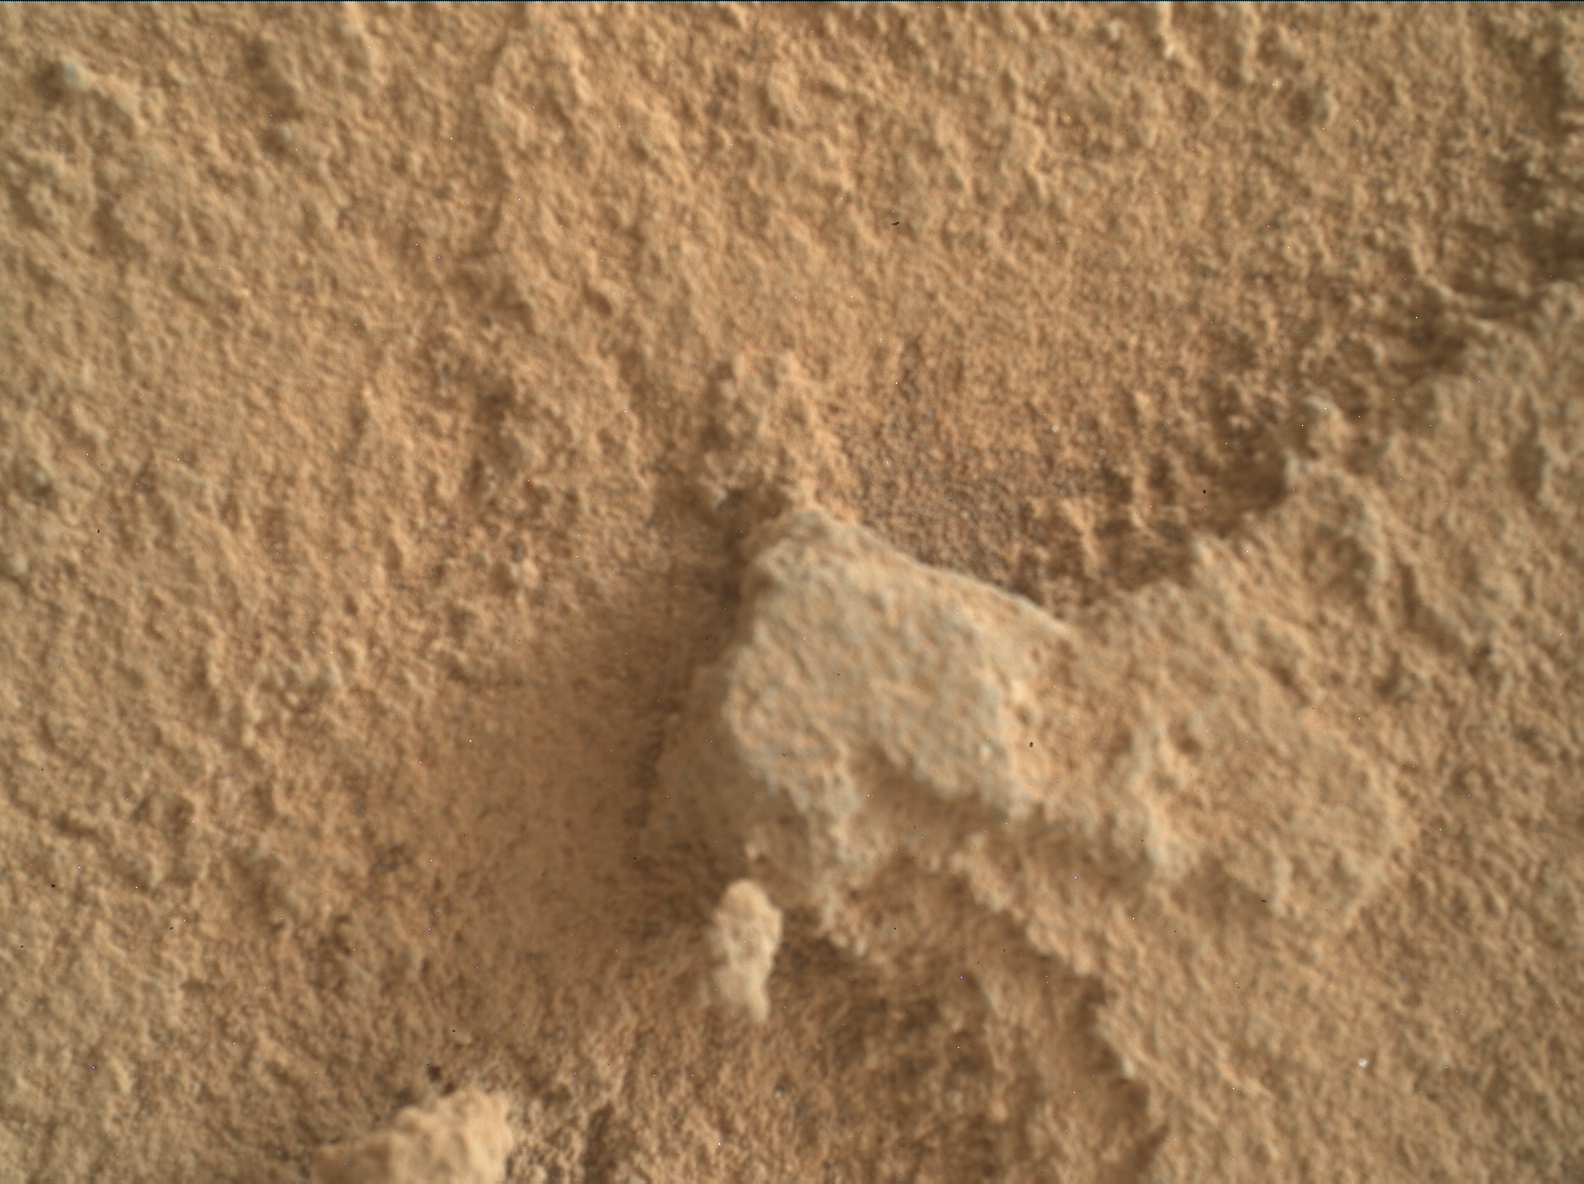 Nasa's Mars rover Curiosity acquired this image using its Mars Hand Lens Imager (MAHLI) on Sol 2733